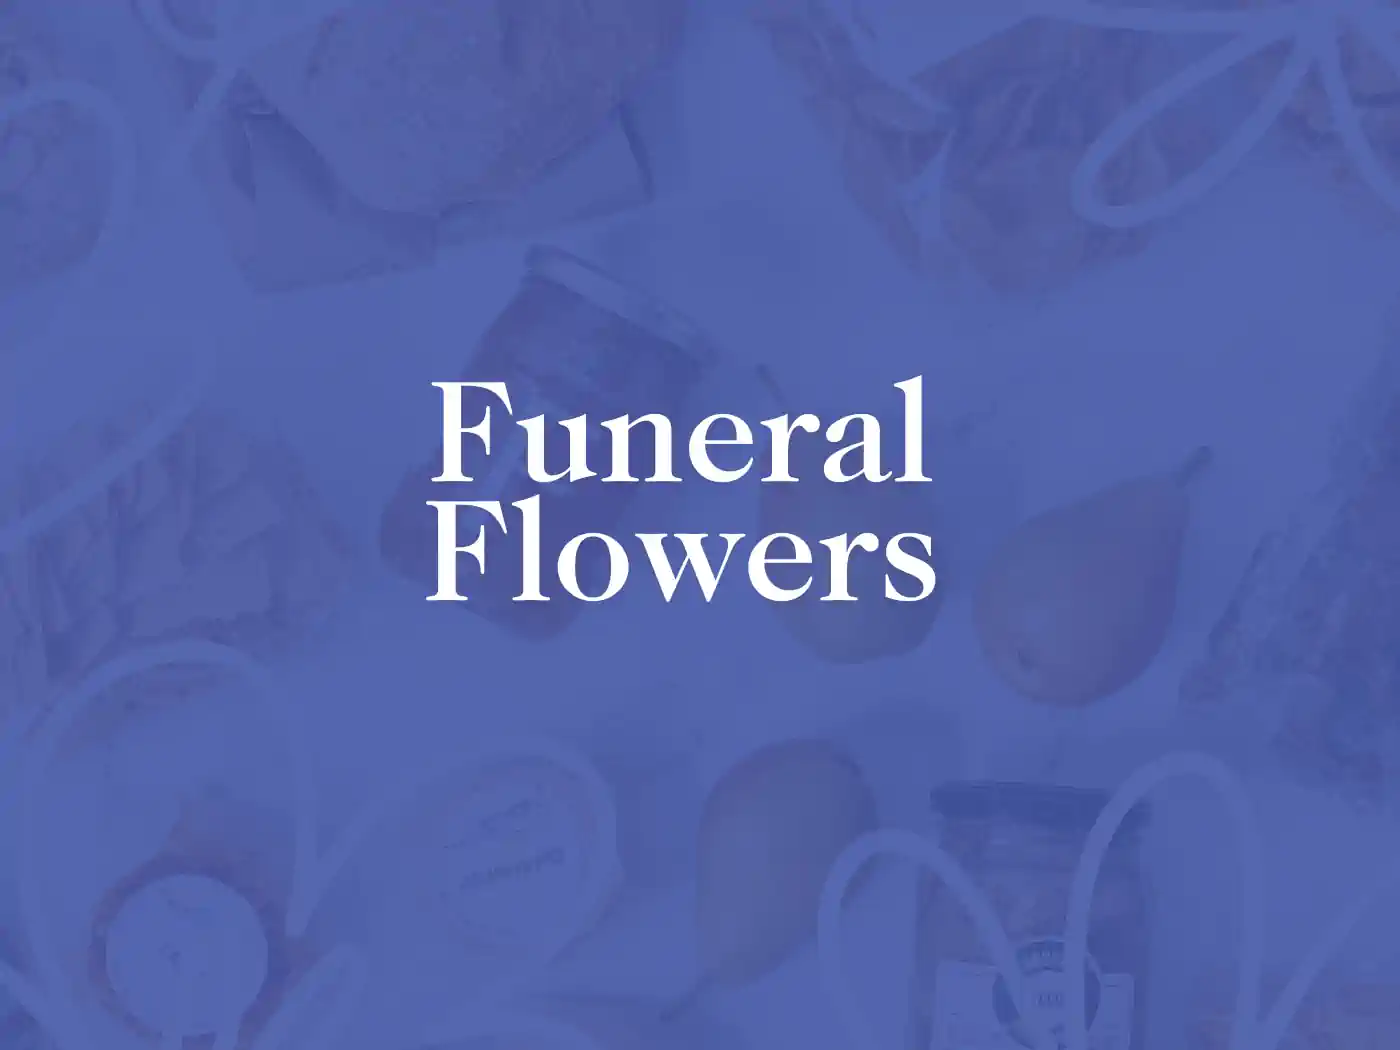 Promotional image with the text 'Funeral Flowers' overlaying a serene blue background, symbolizing respect and remembrance. Fabulous Flowers and Gifts.